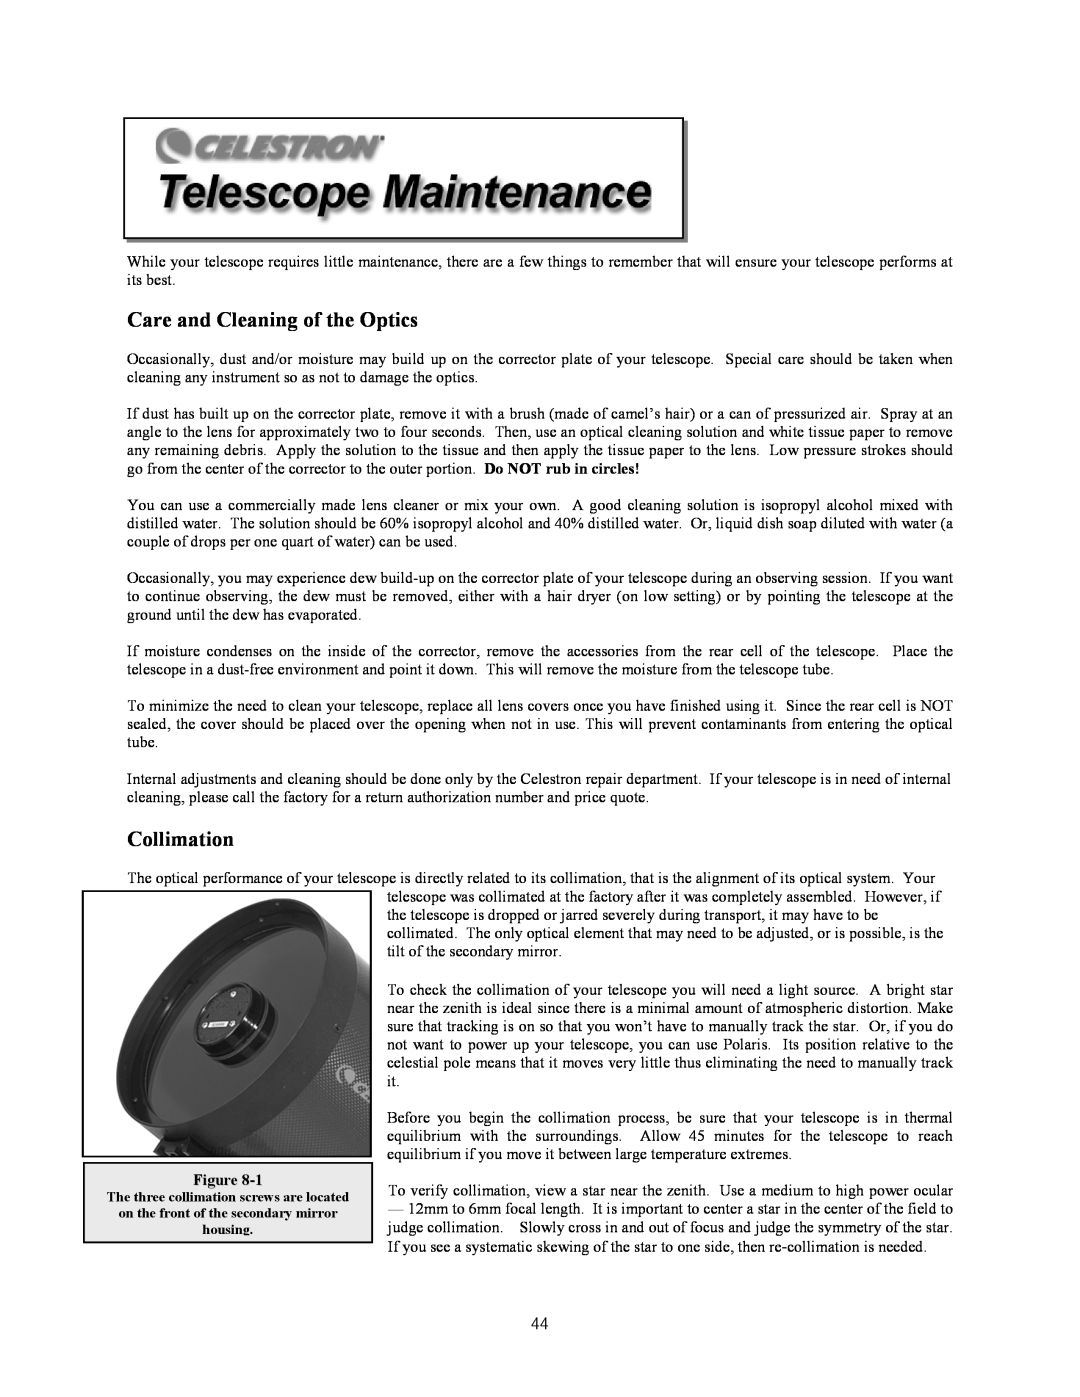 Celestron C9.25-S, C8-S, C5-S instruction manual Care and Cleaning of the Optics, Collimation 